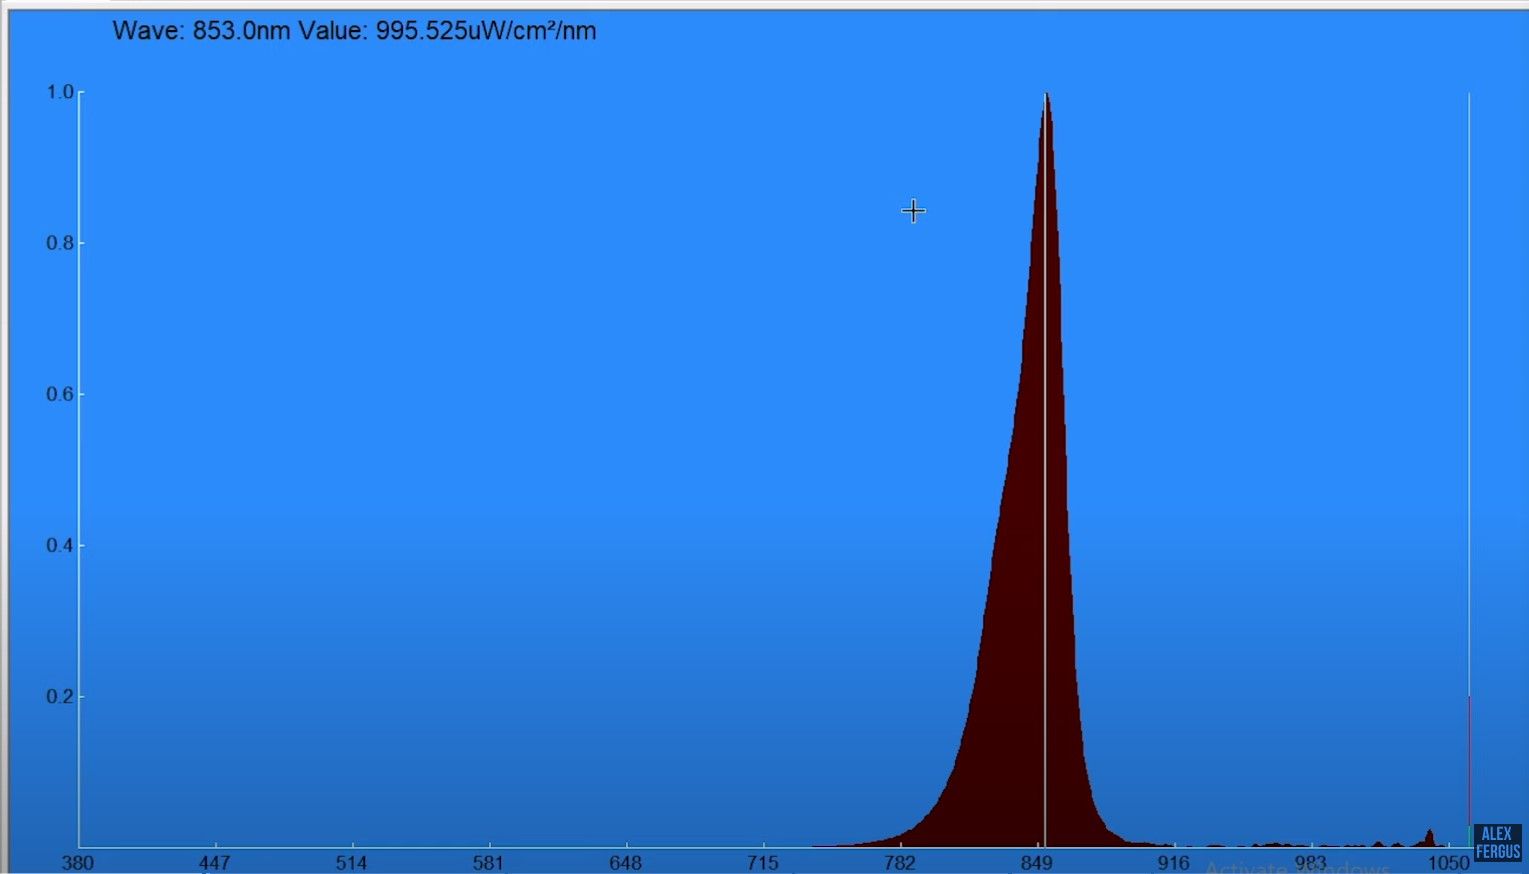 The spectrometer graph shows a second peak at 850nm